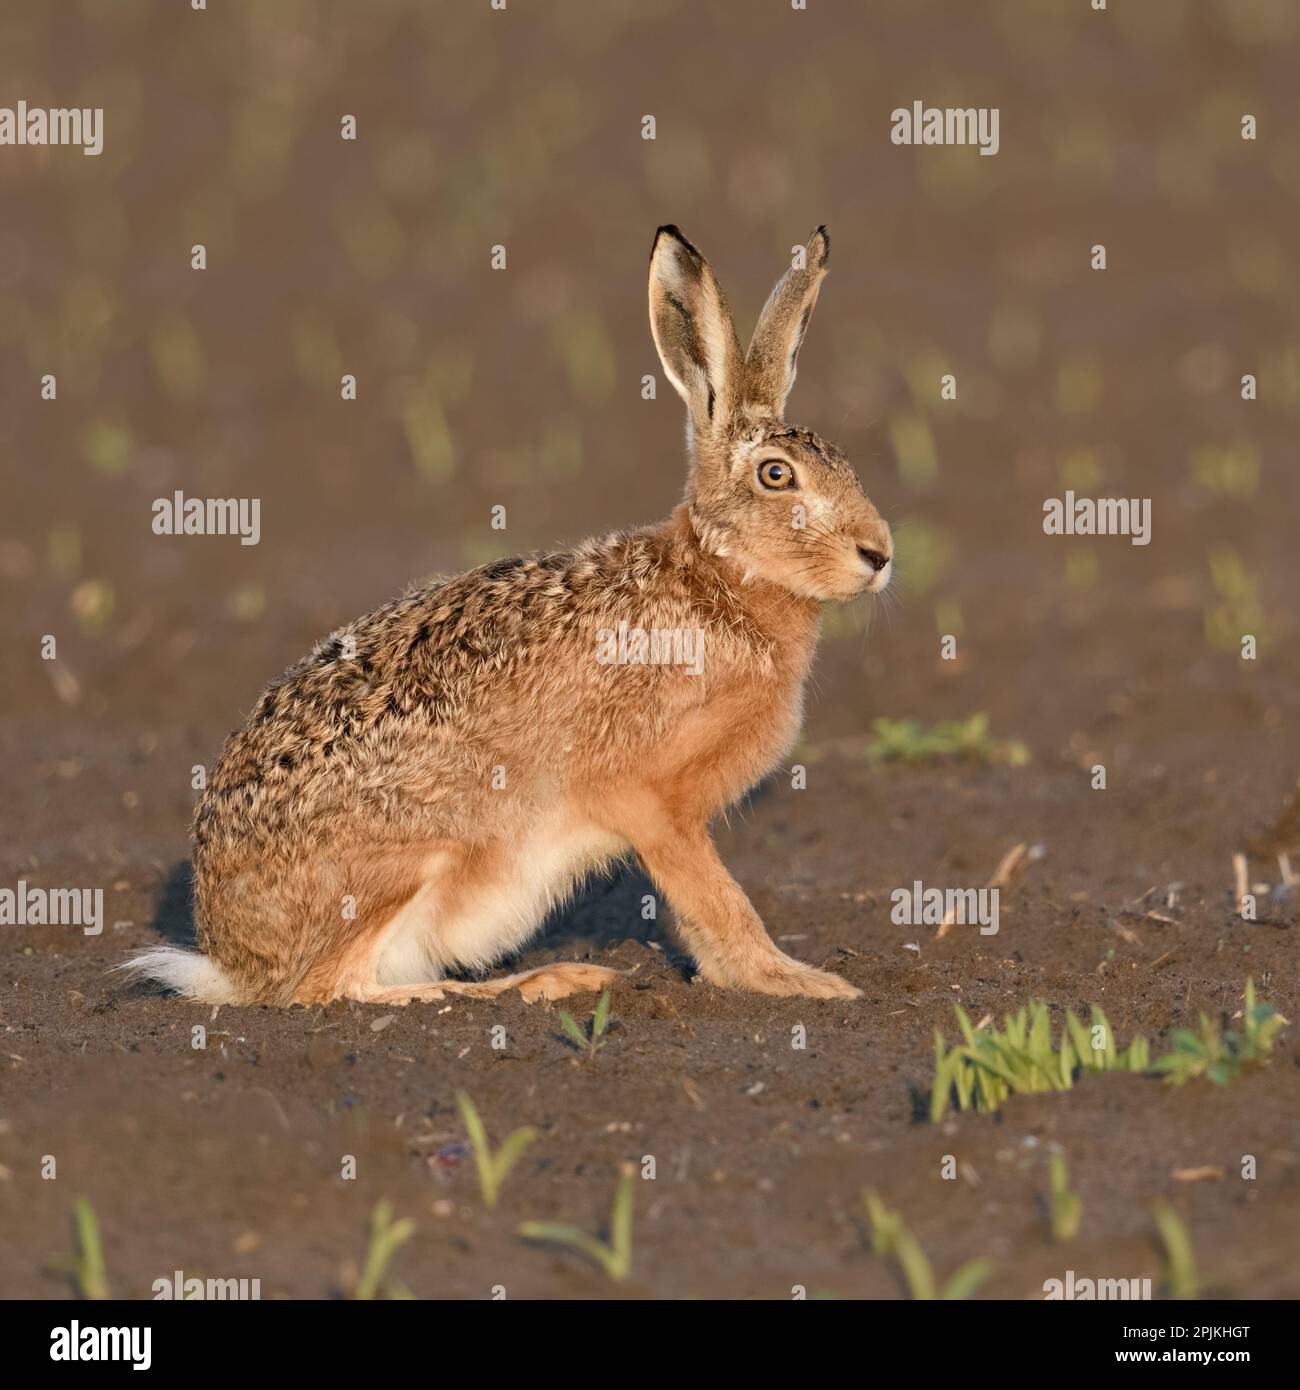 in the evening light... European hare ( Lepus europaeus ) on a freshly tilled field sitting in the sun Stock Photo